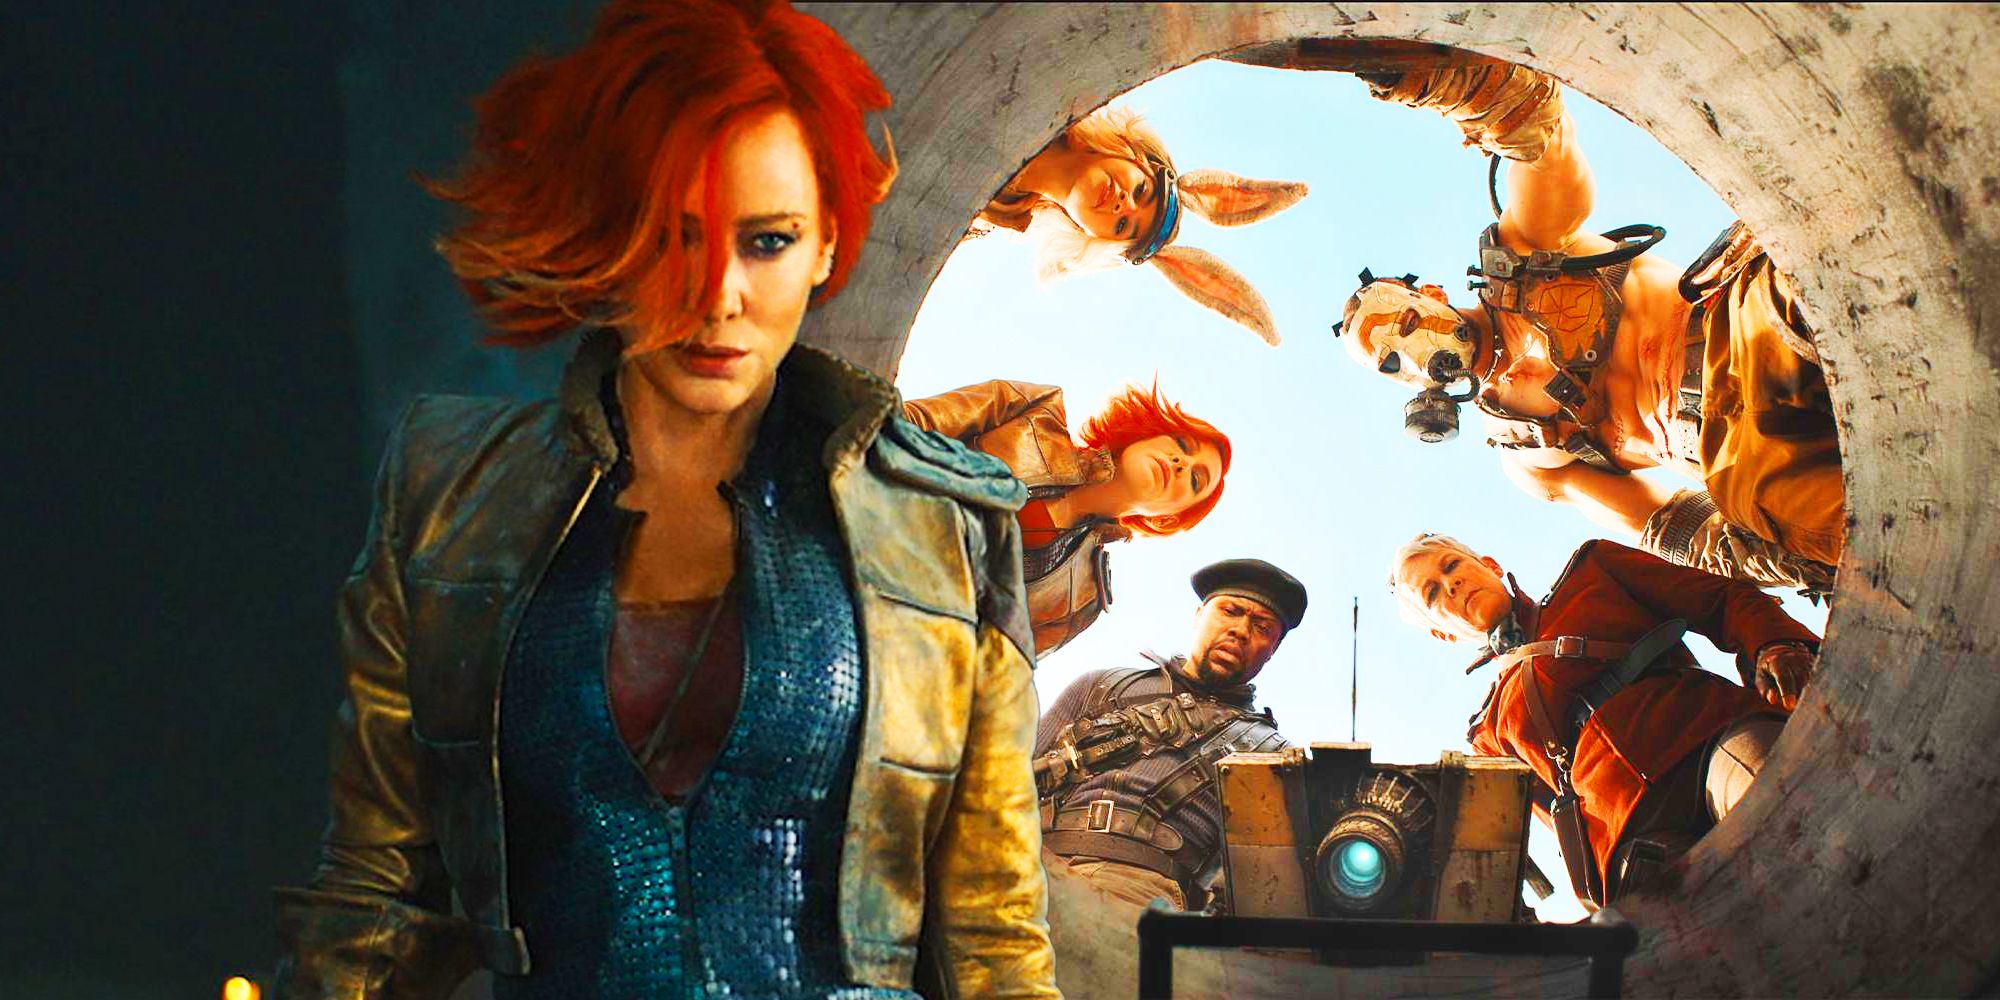 Cate Blanchett and the cast of Borderlands